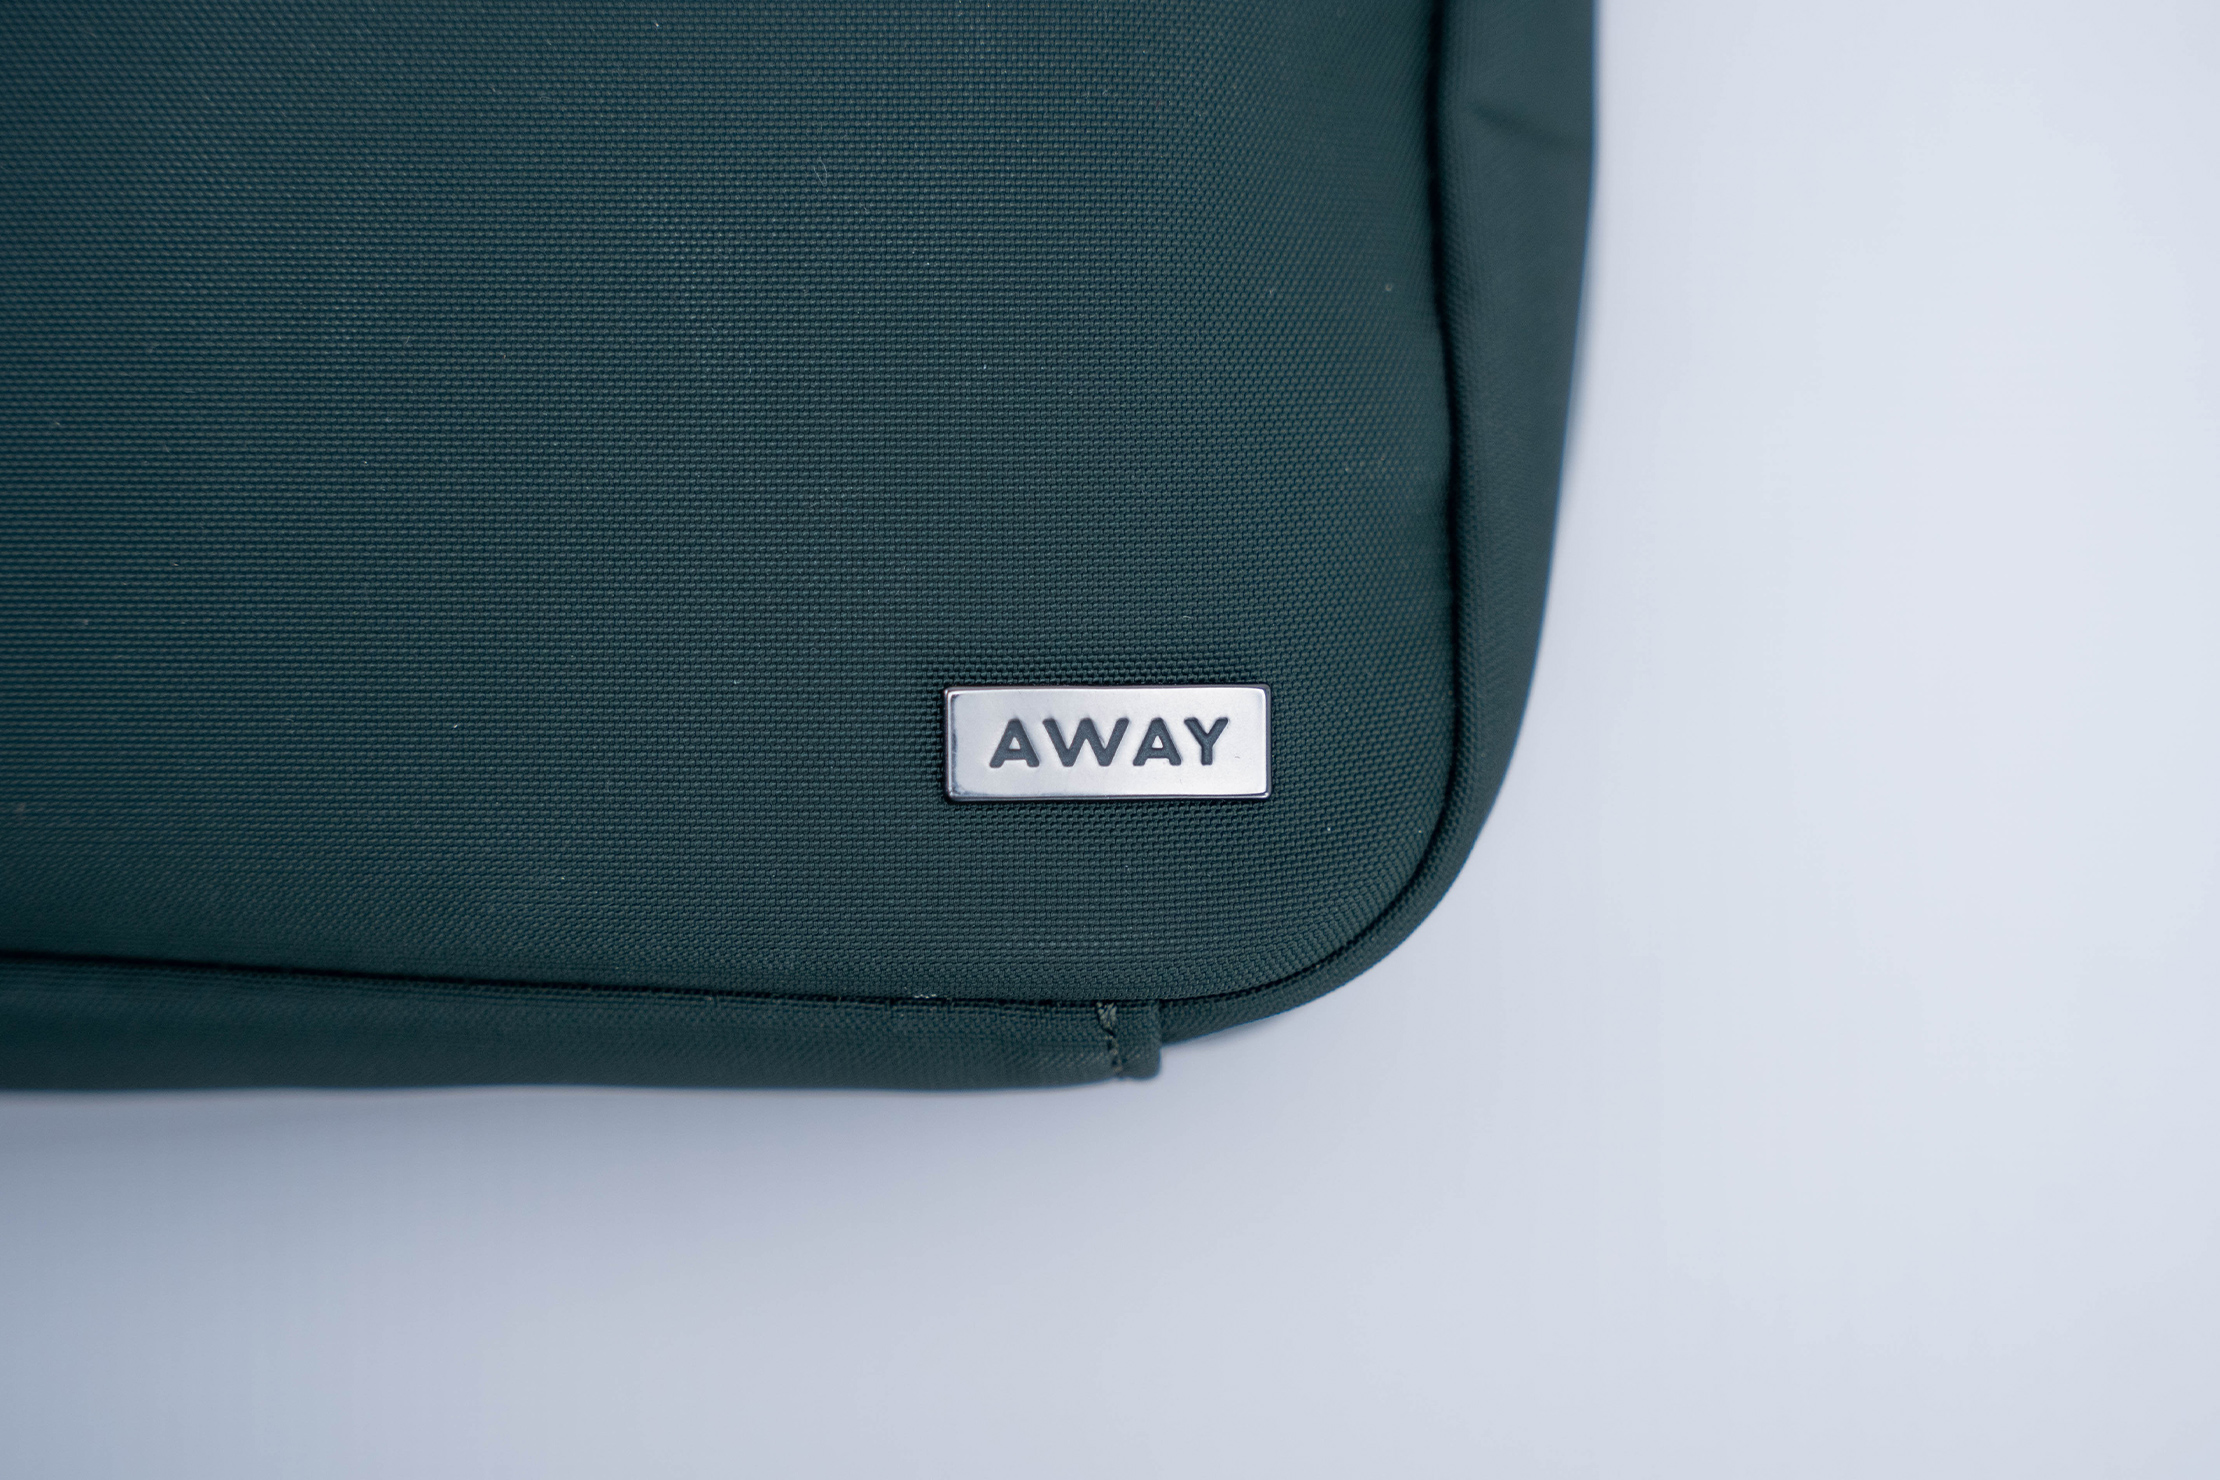 Away The Hanging Toiletry Bag Brand